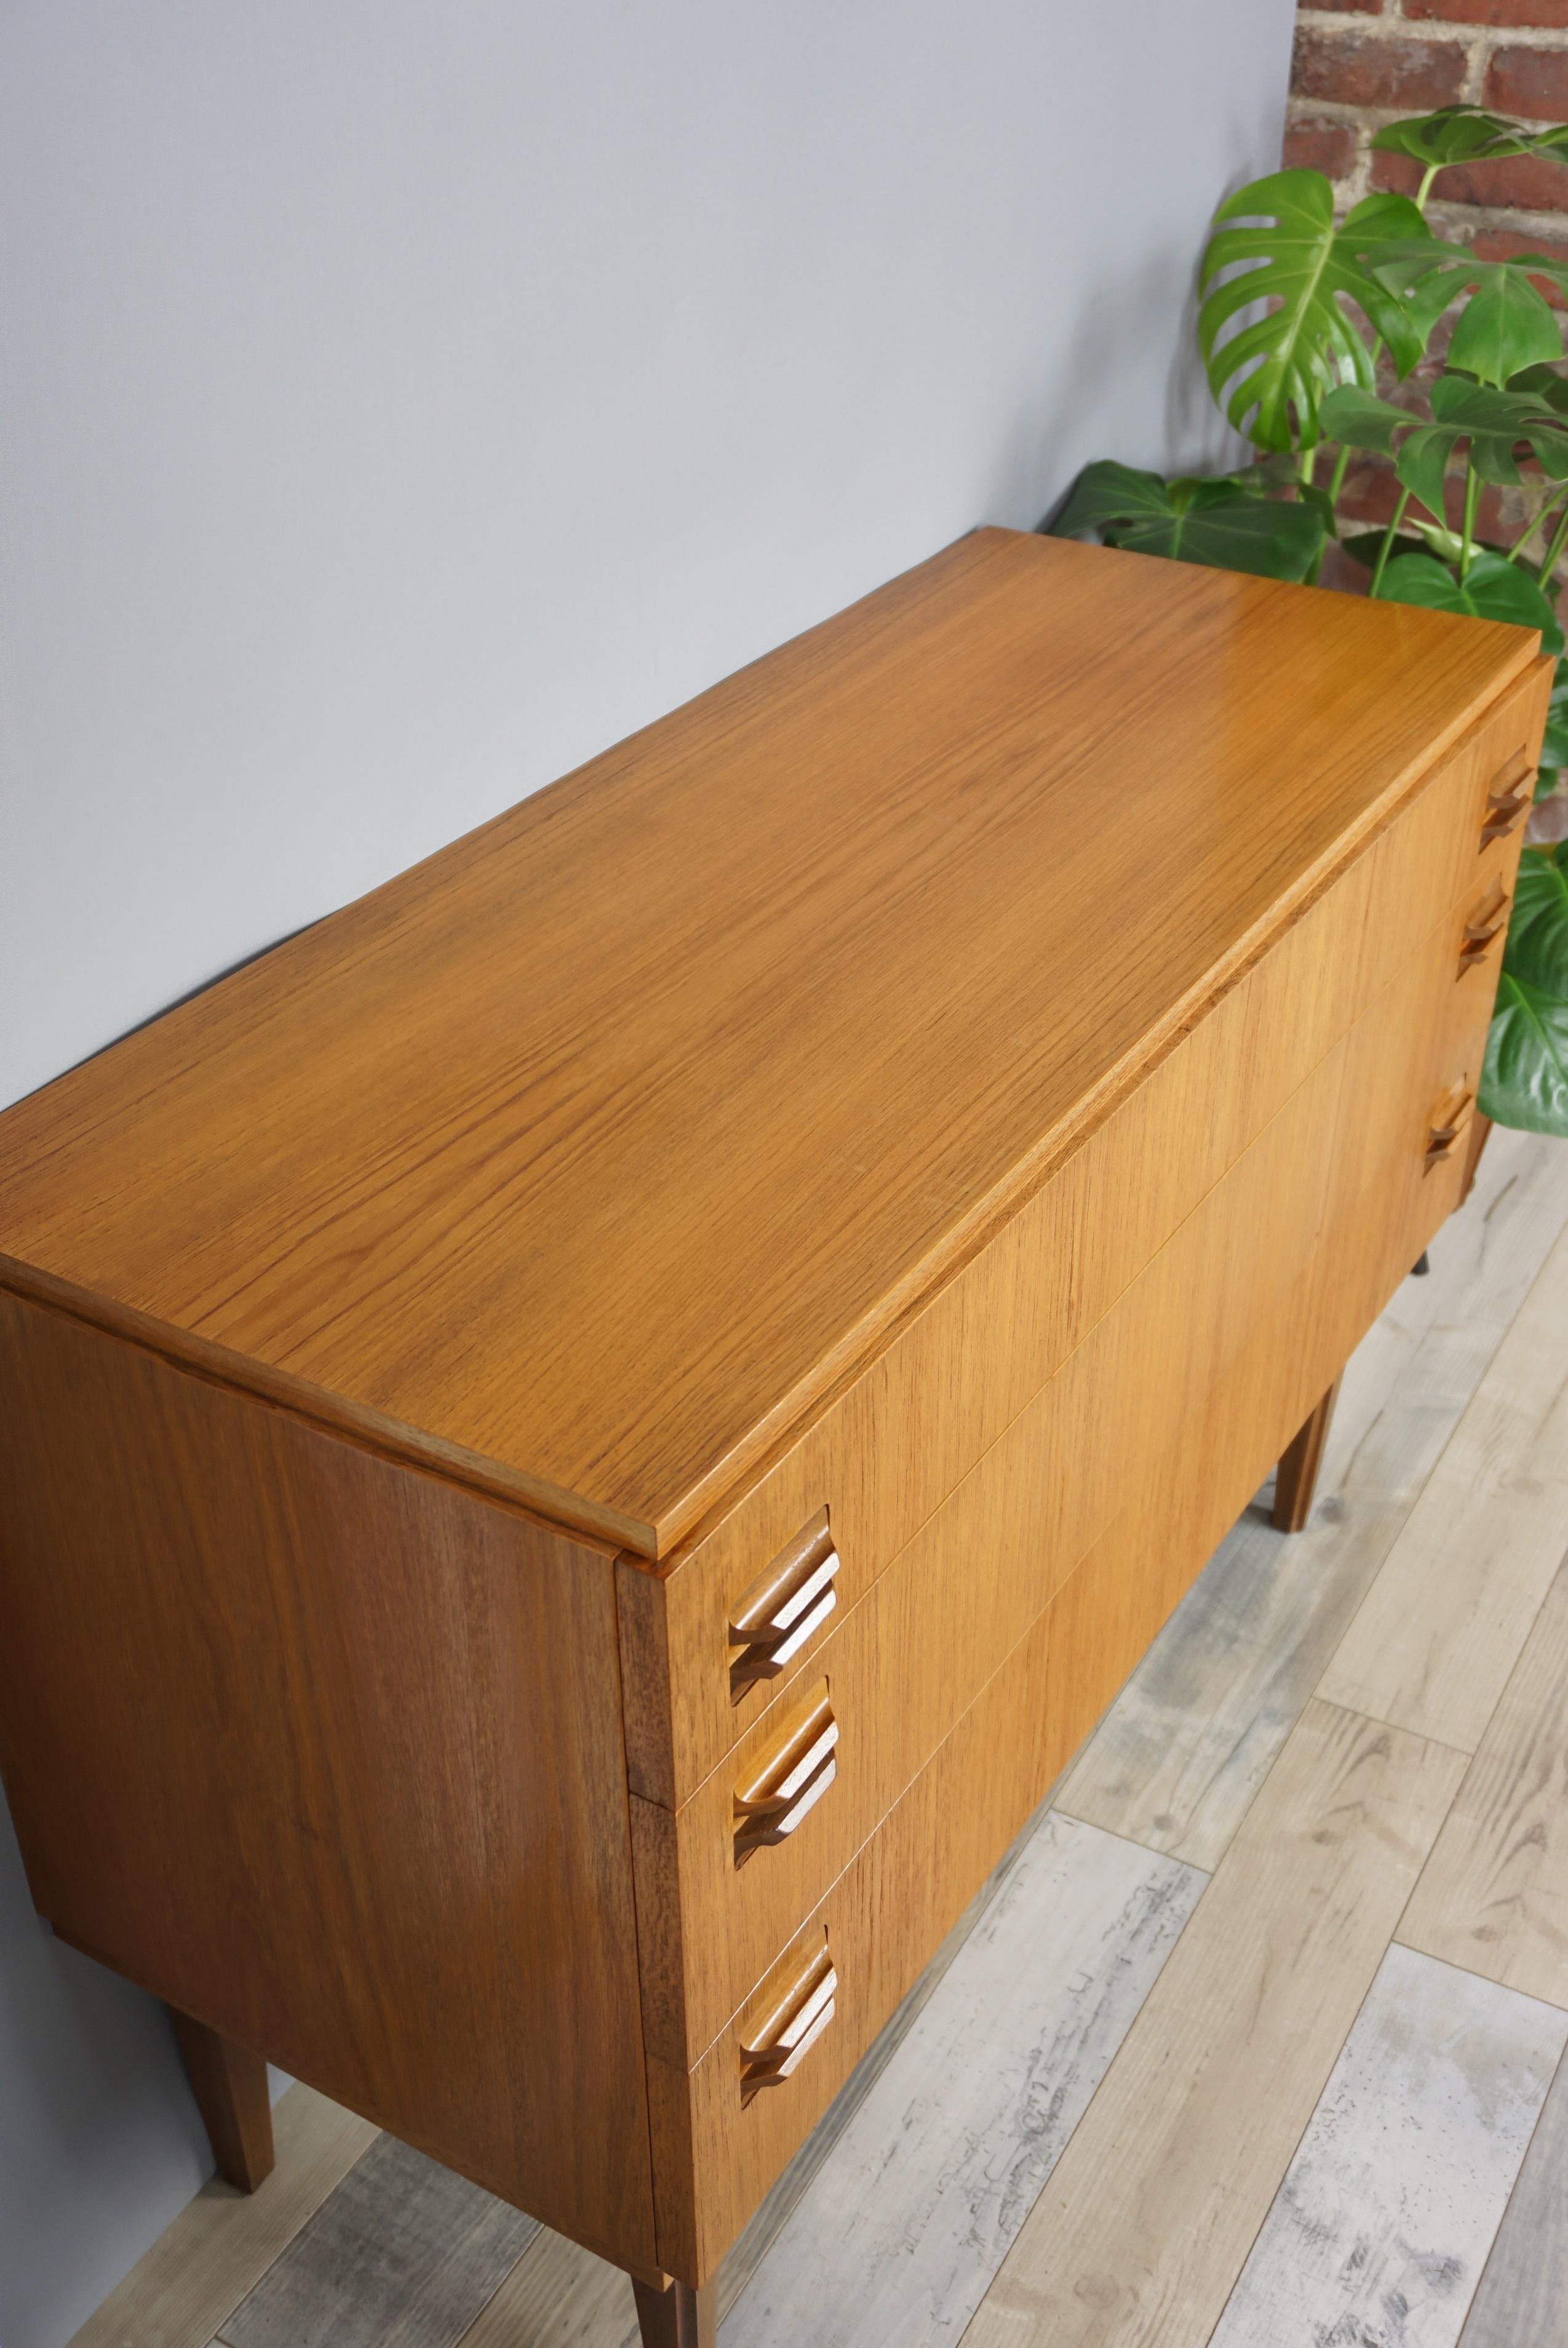 Teak wooden chest of drawers Scandinavian design from the 1960s, beautiful and practical. Sign of fine, delicate and quality work: its sculpted handles and feet just like the interior of wooden drawers. All in excellent condition.